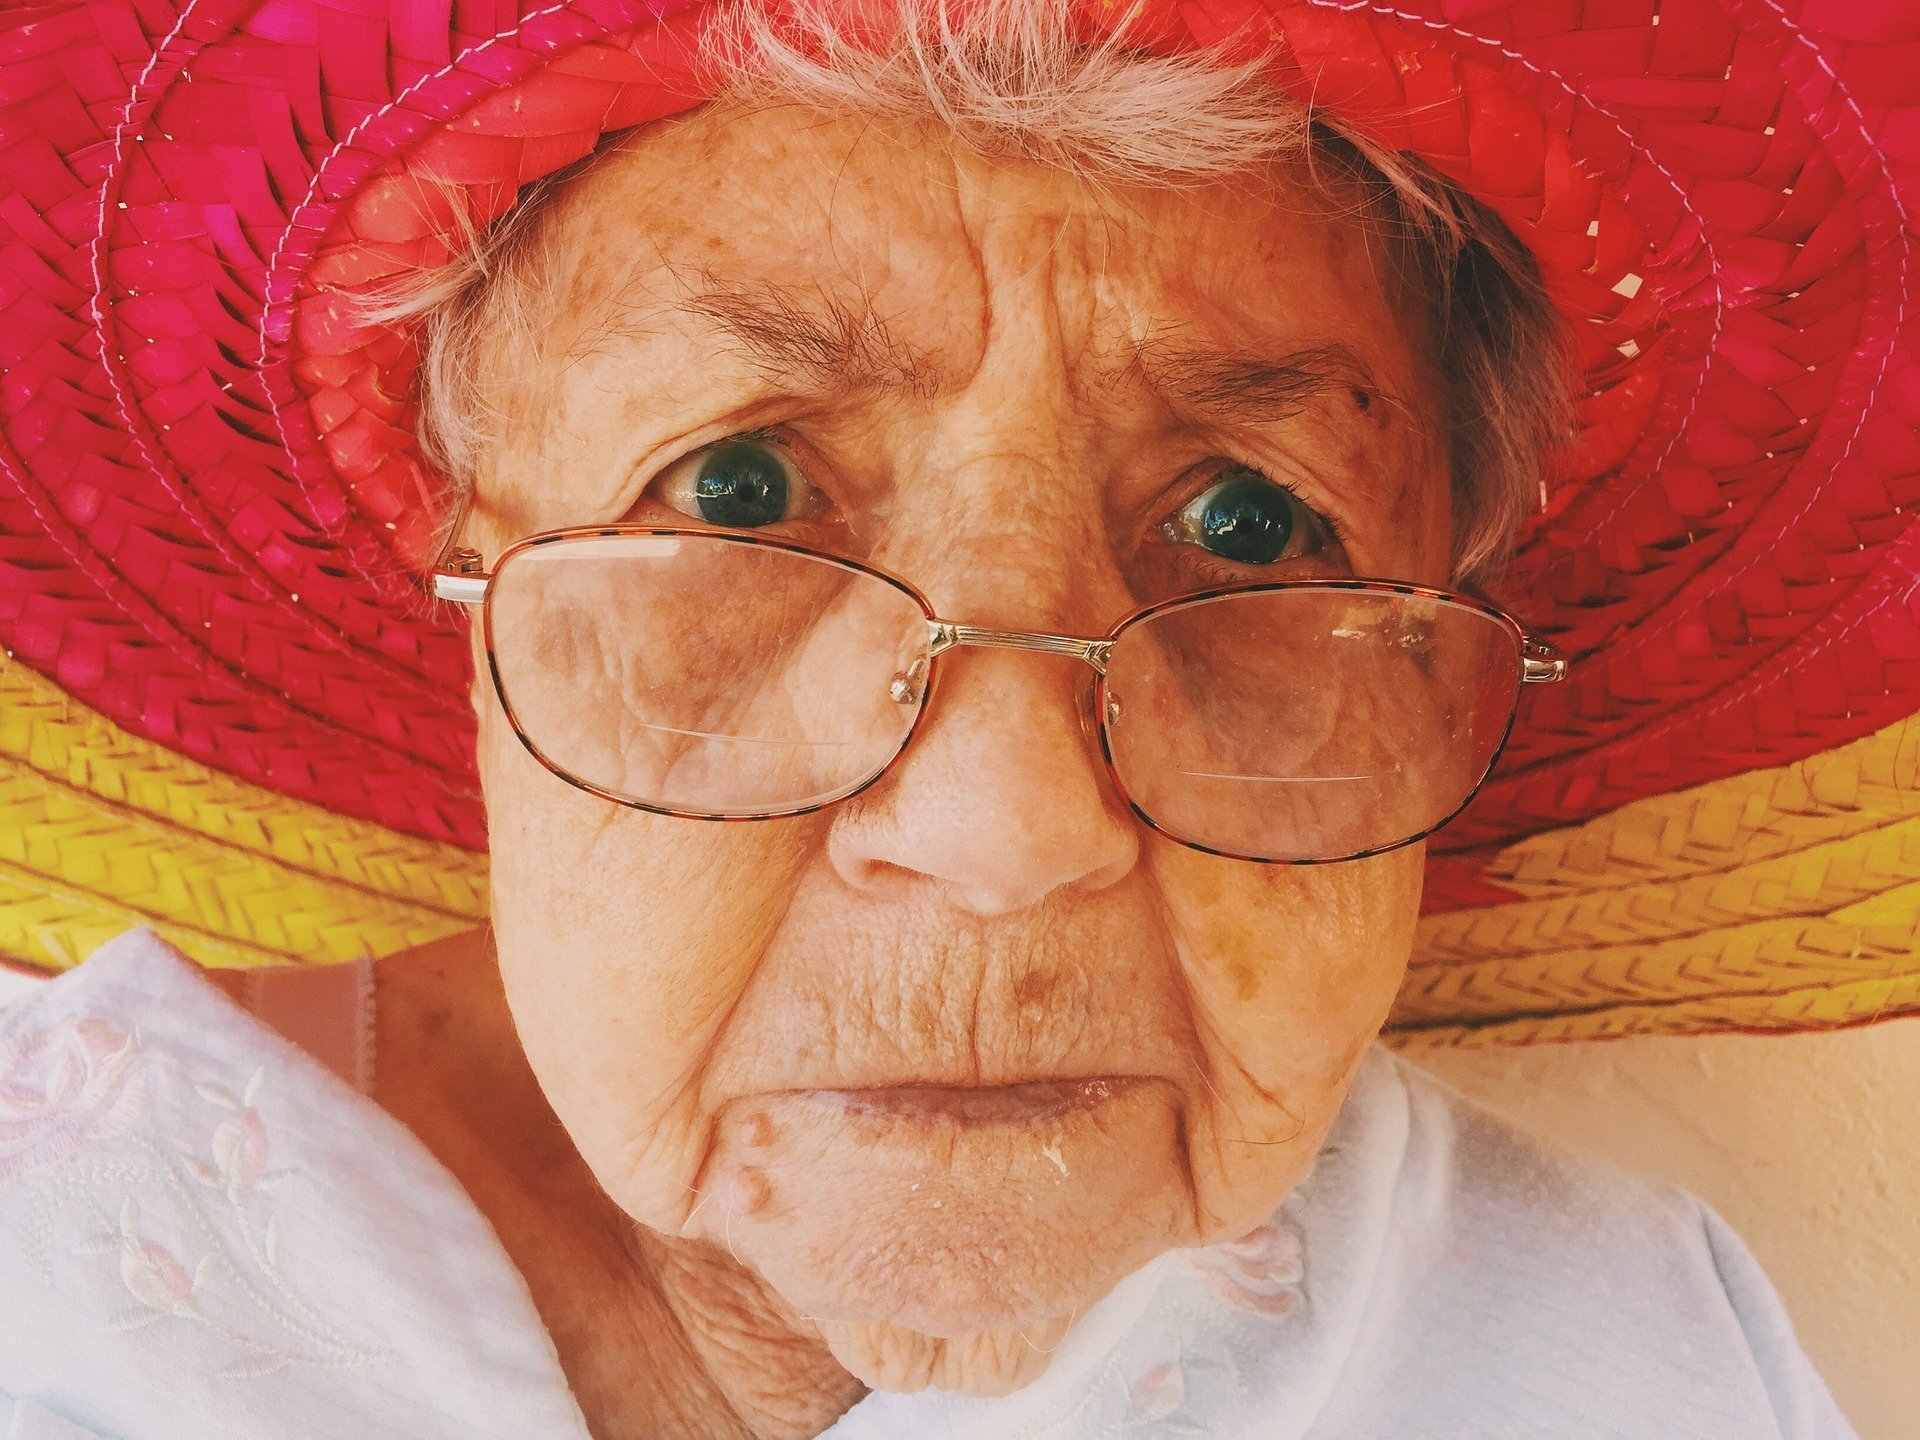 An old woman looking shocked while wearing a colorful hat and glasses. | Photo: Pixabay